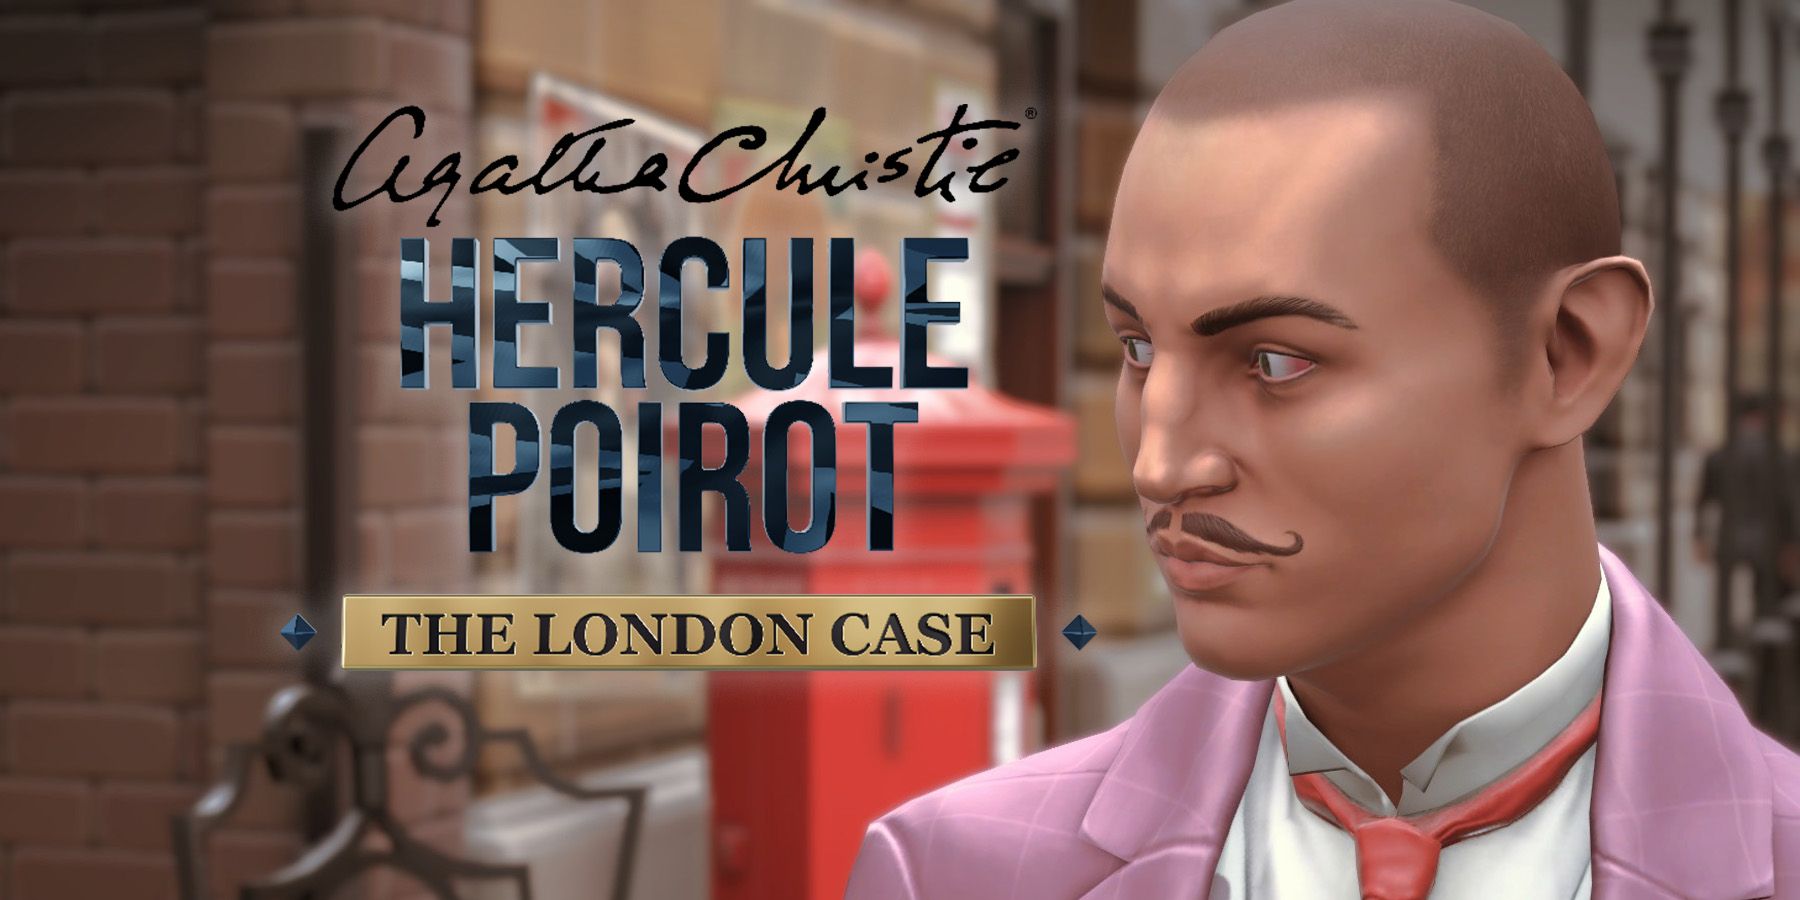 Agatha Christie Hercule Poirot The London Case image with the game title and Poirot looking off to his right.